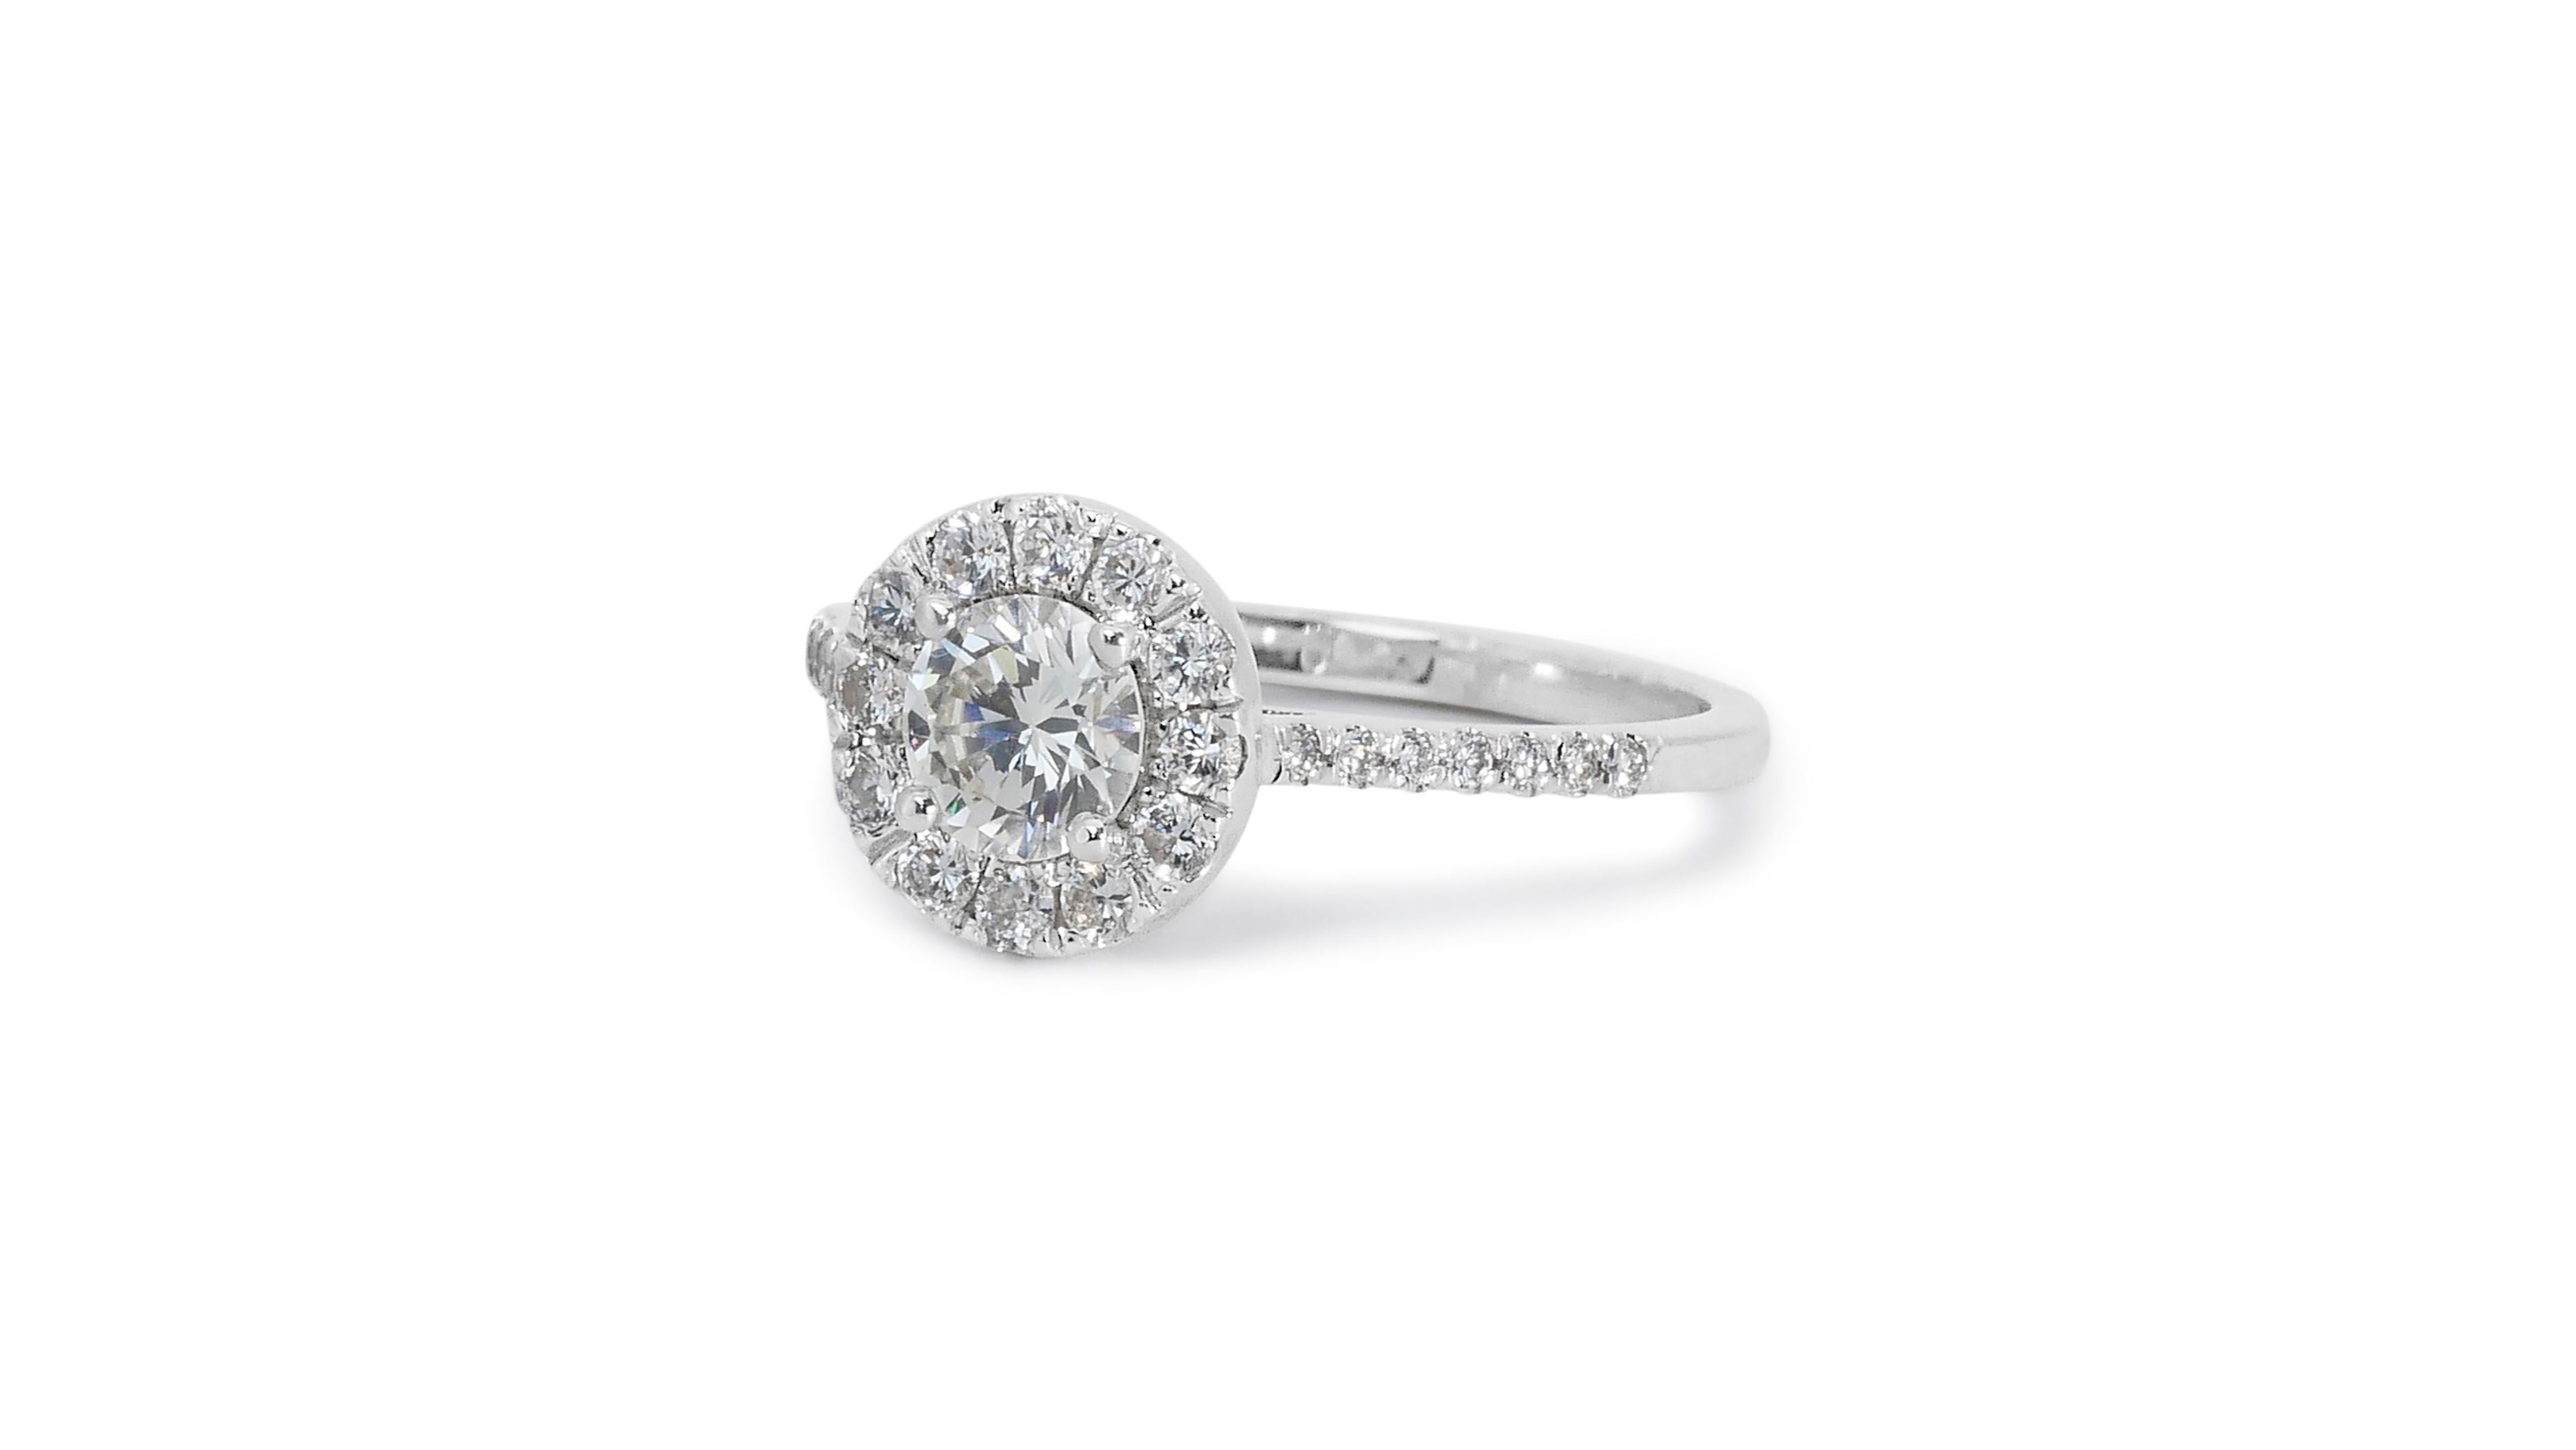 Round Cut Glamorous 1.30ct Diamonds Halo Ring in 18k White Gold - GIA Certified For Sale